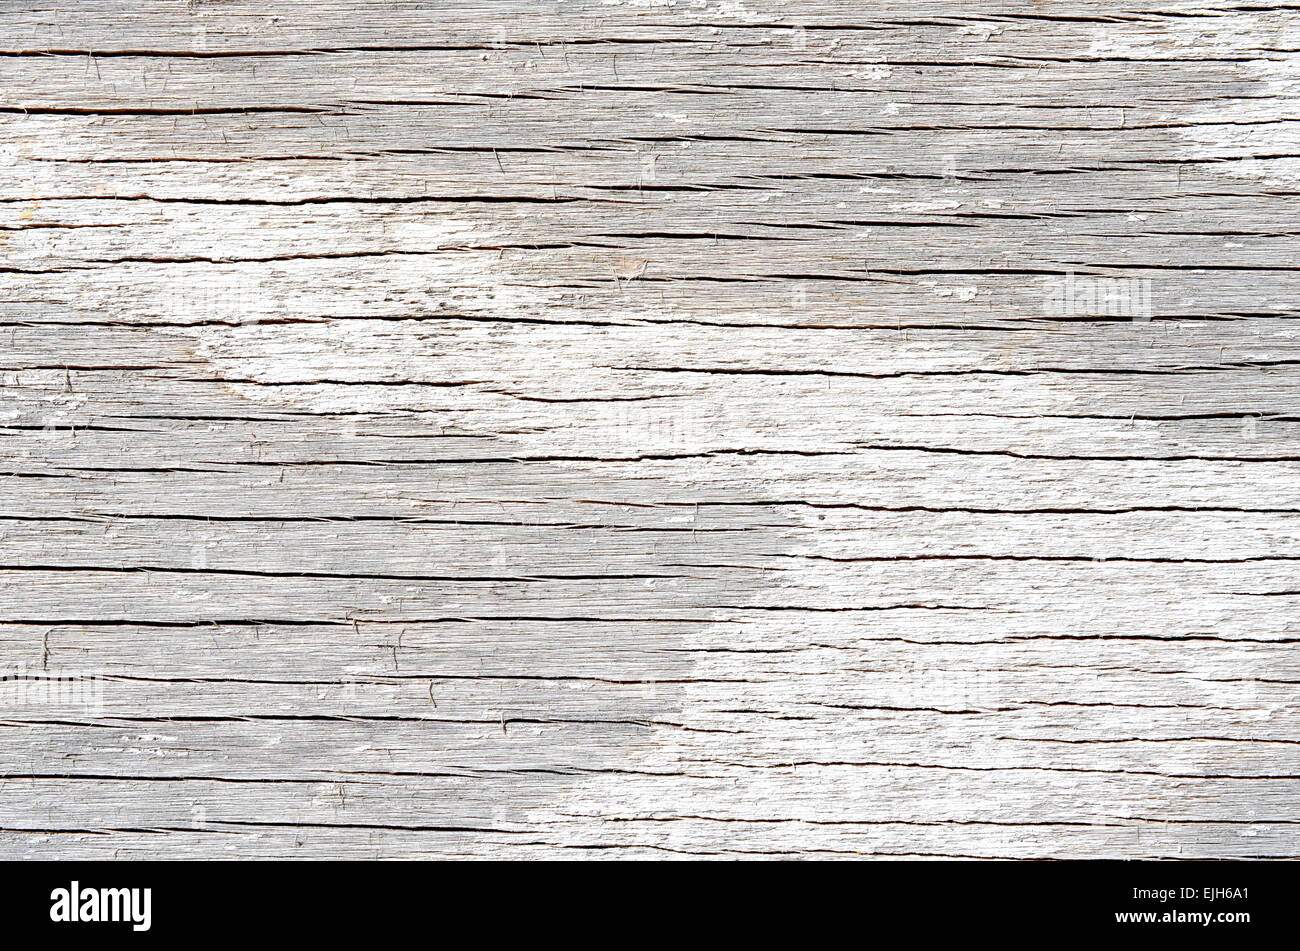 White weathered bleached wood grain Stock Photo